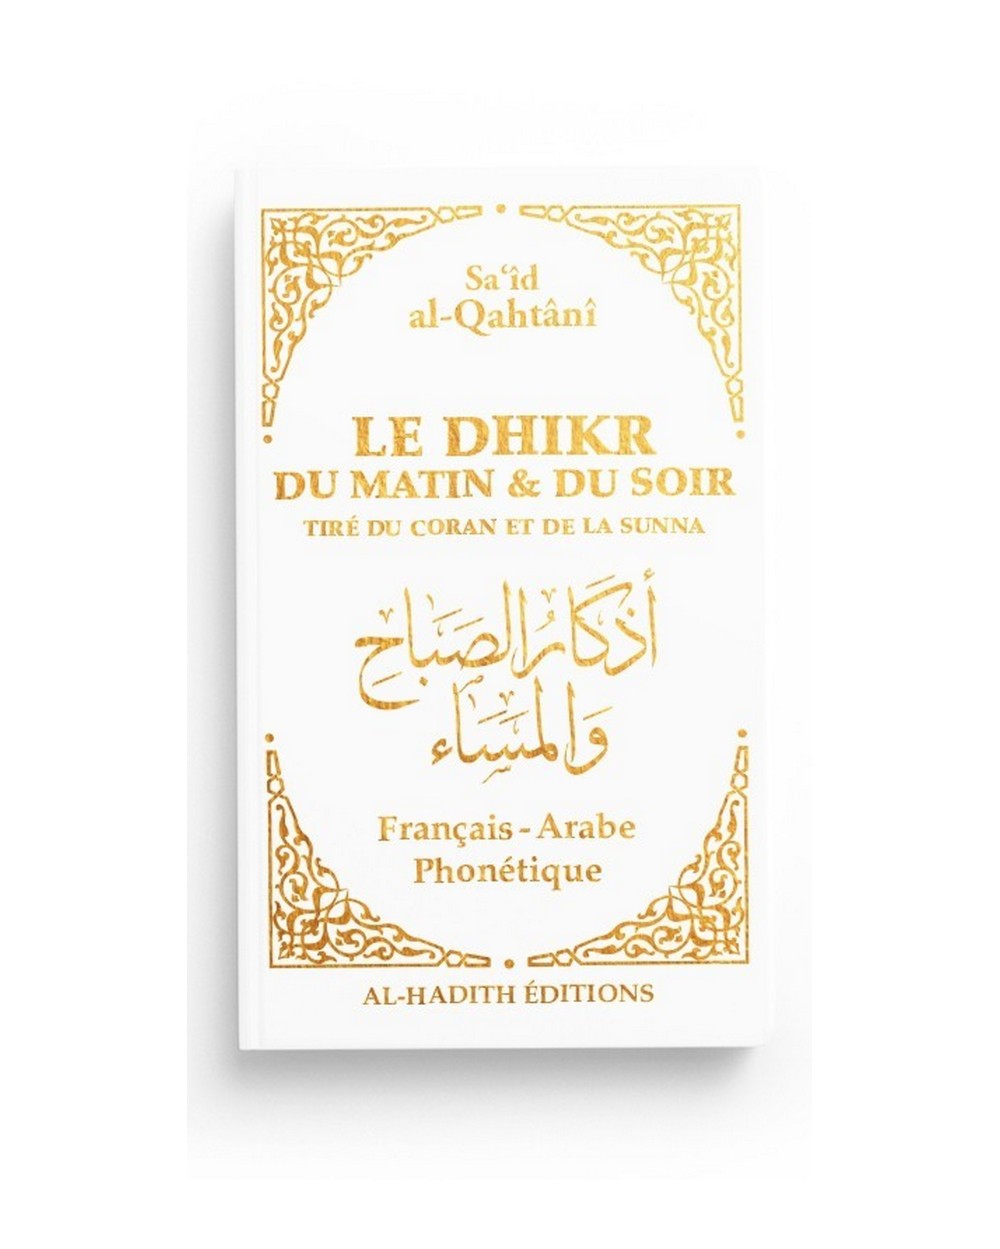 The morning and evening dhikr - Al hadith edition